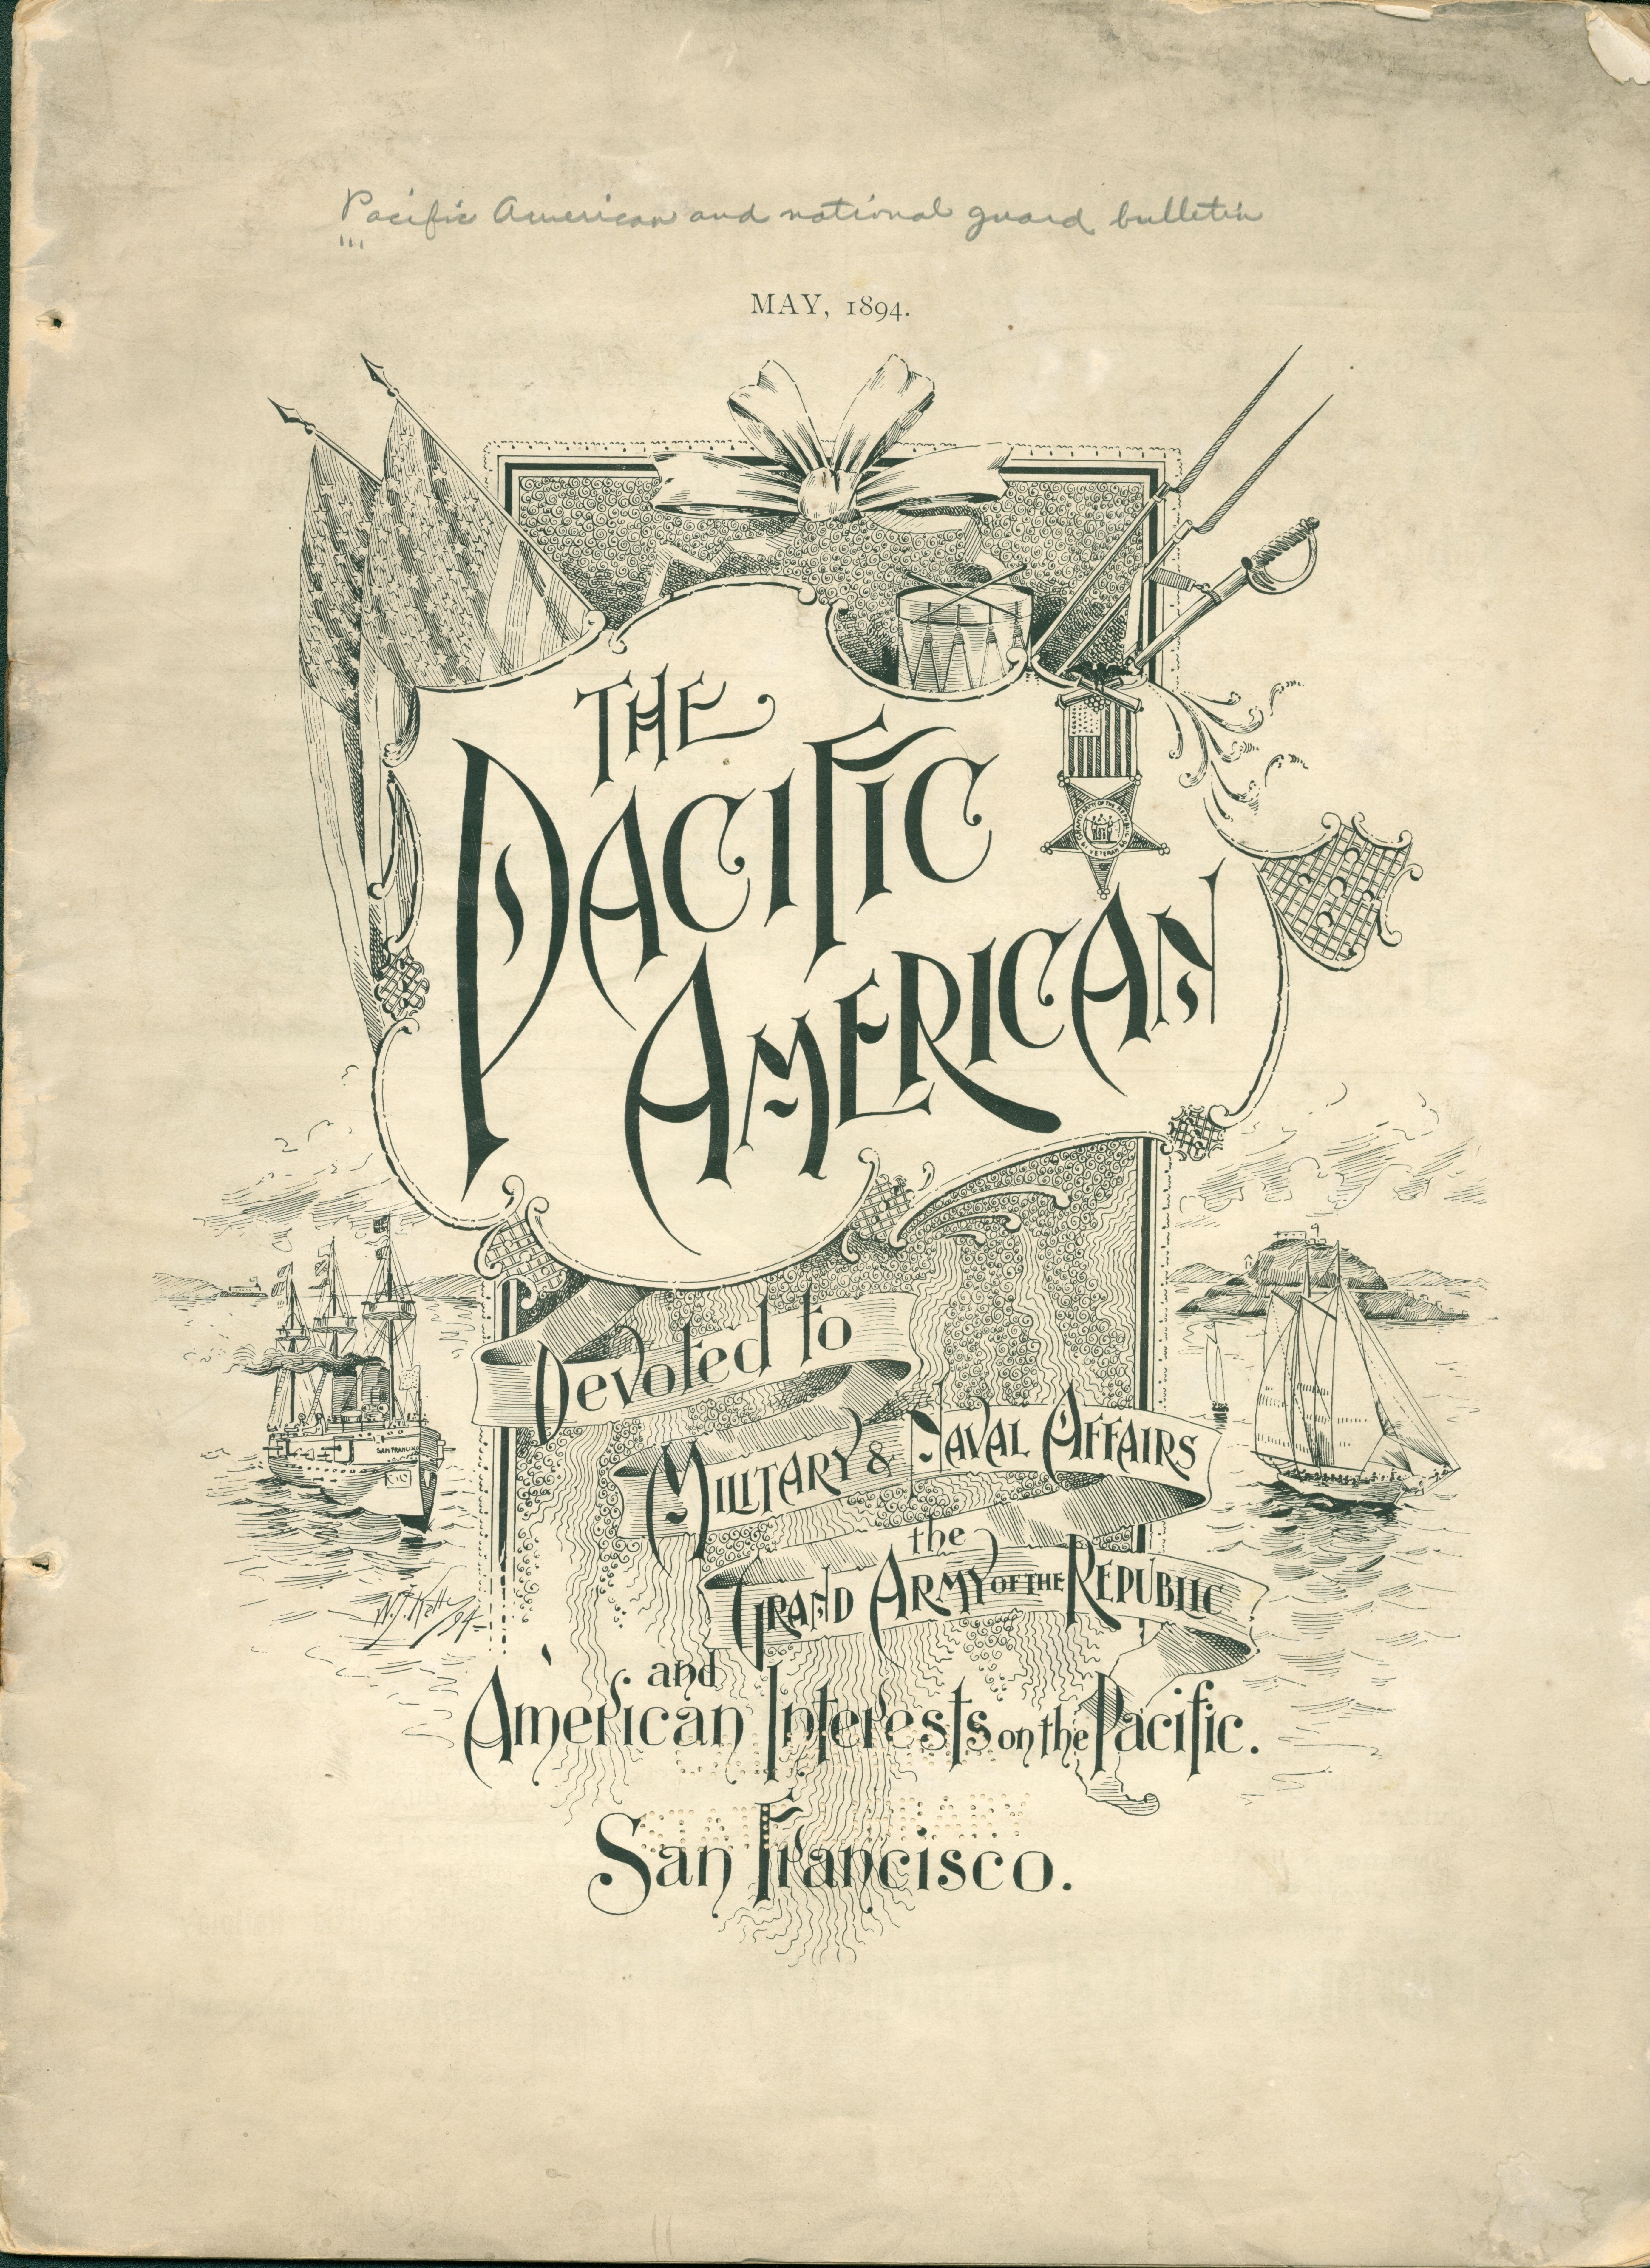 Front covers shows a vignette with title information surrounded by ships